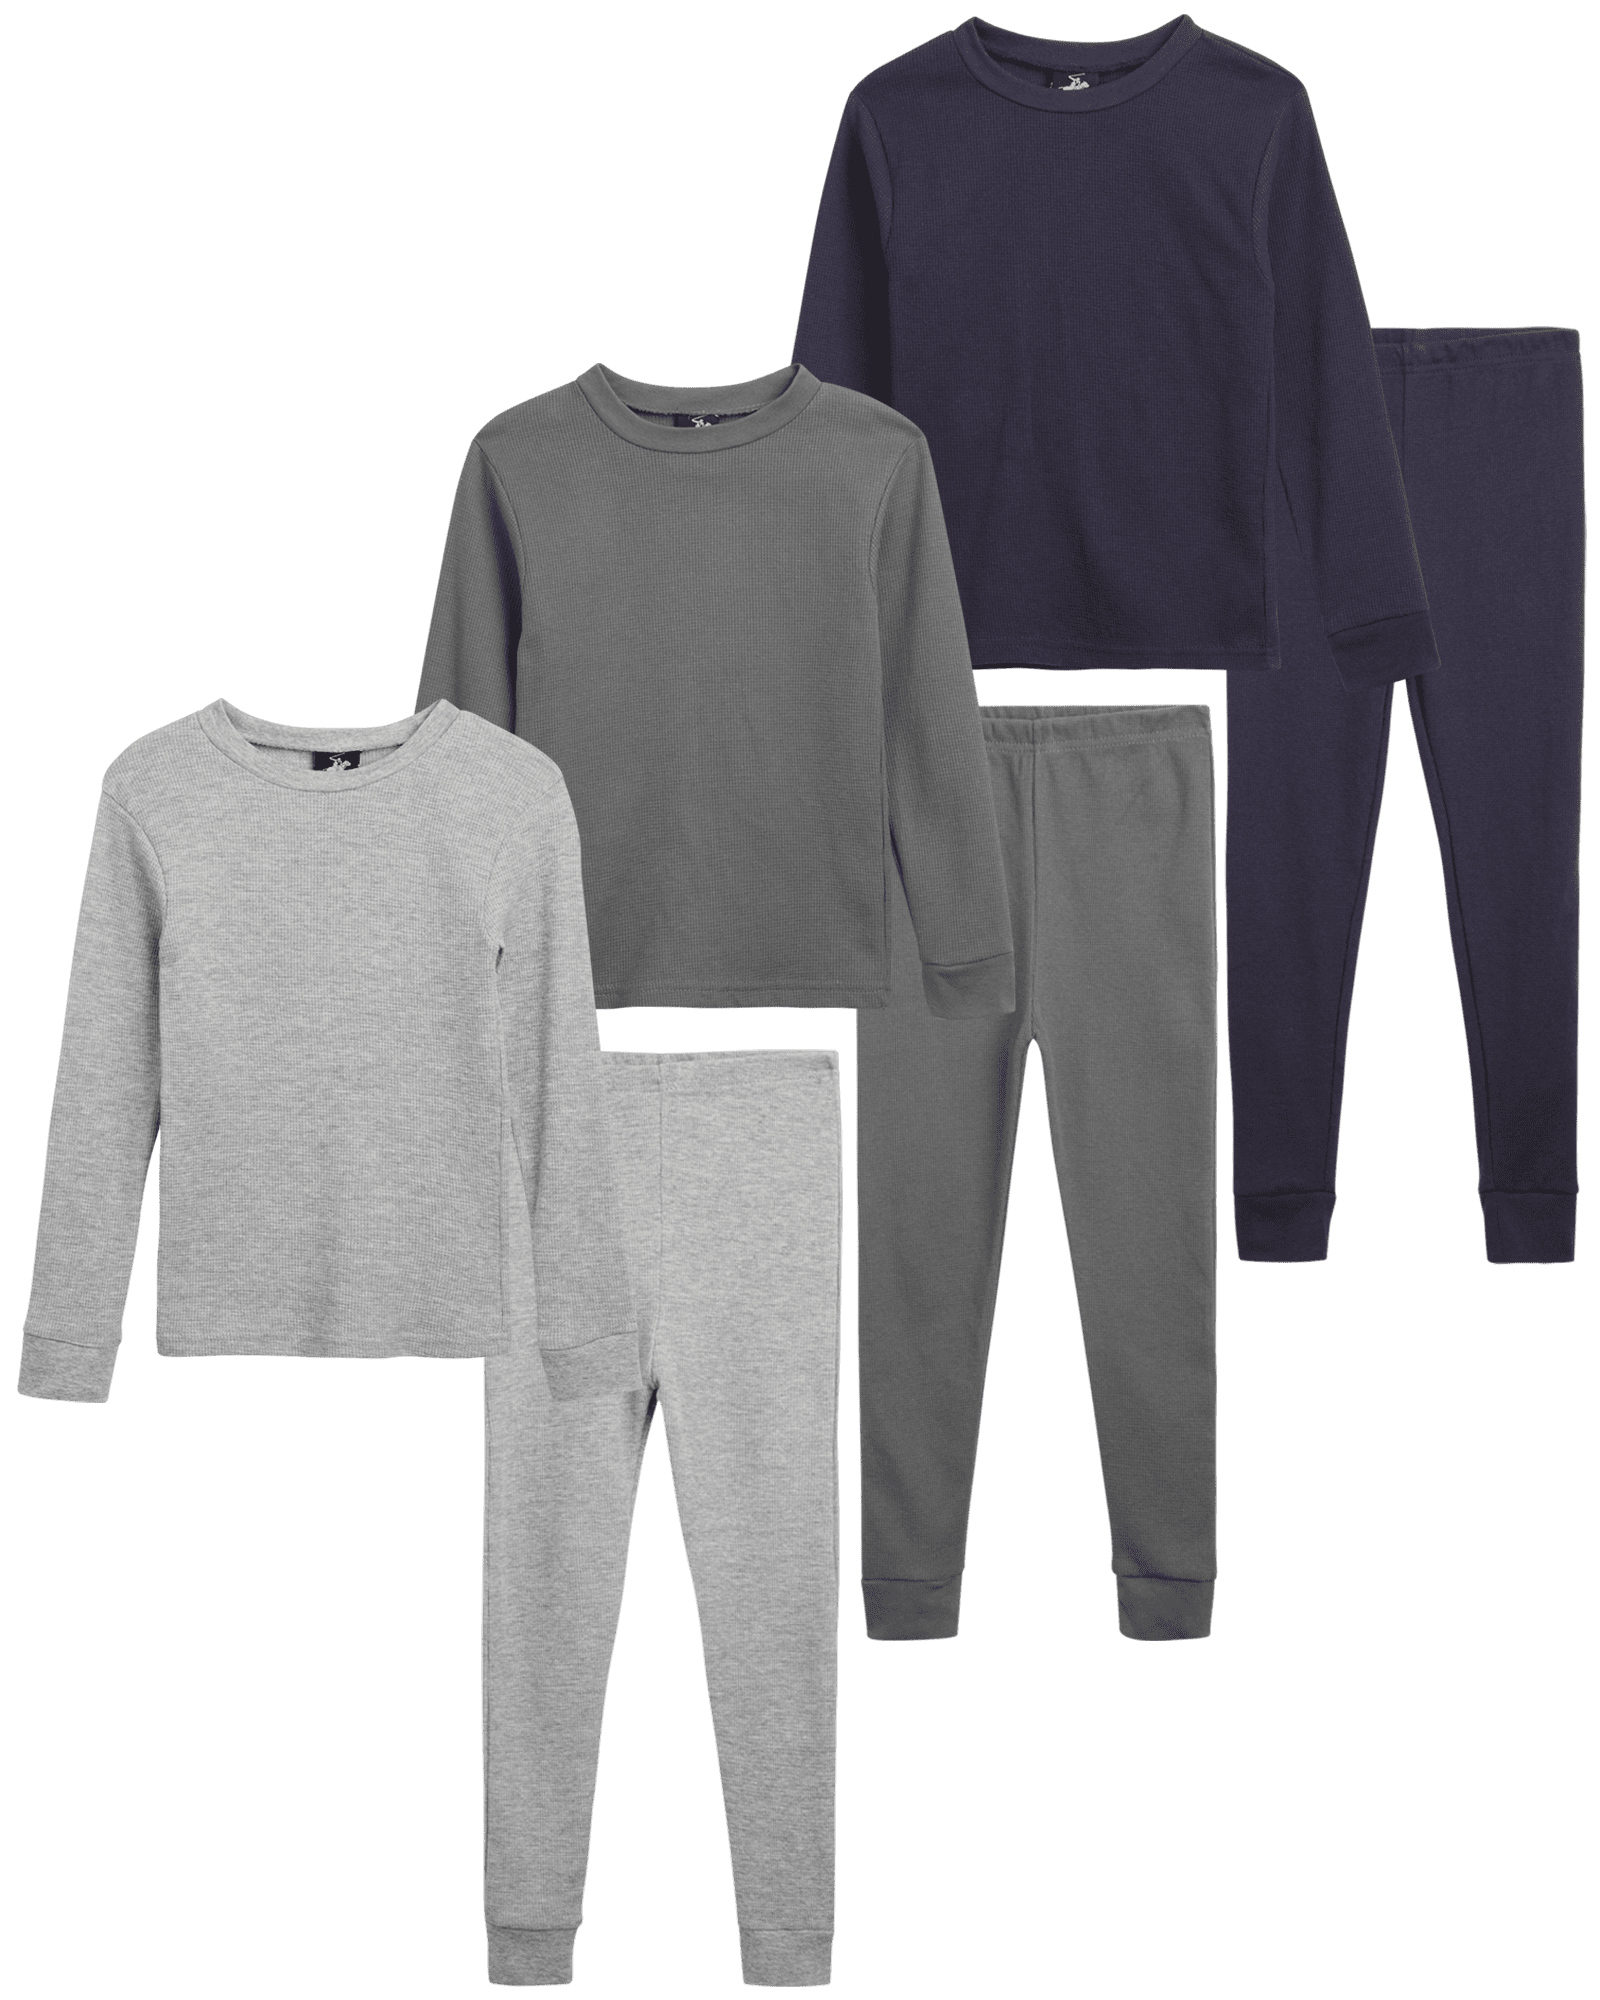 4 Piece Brushed Fleece Top and Long Johns Only Boys Thermal Underwear Set 2T-16 